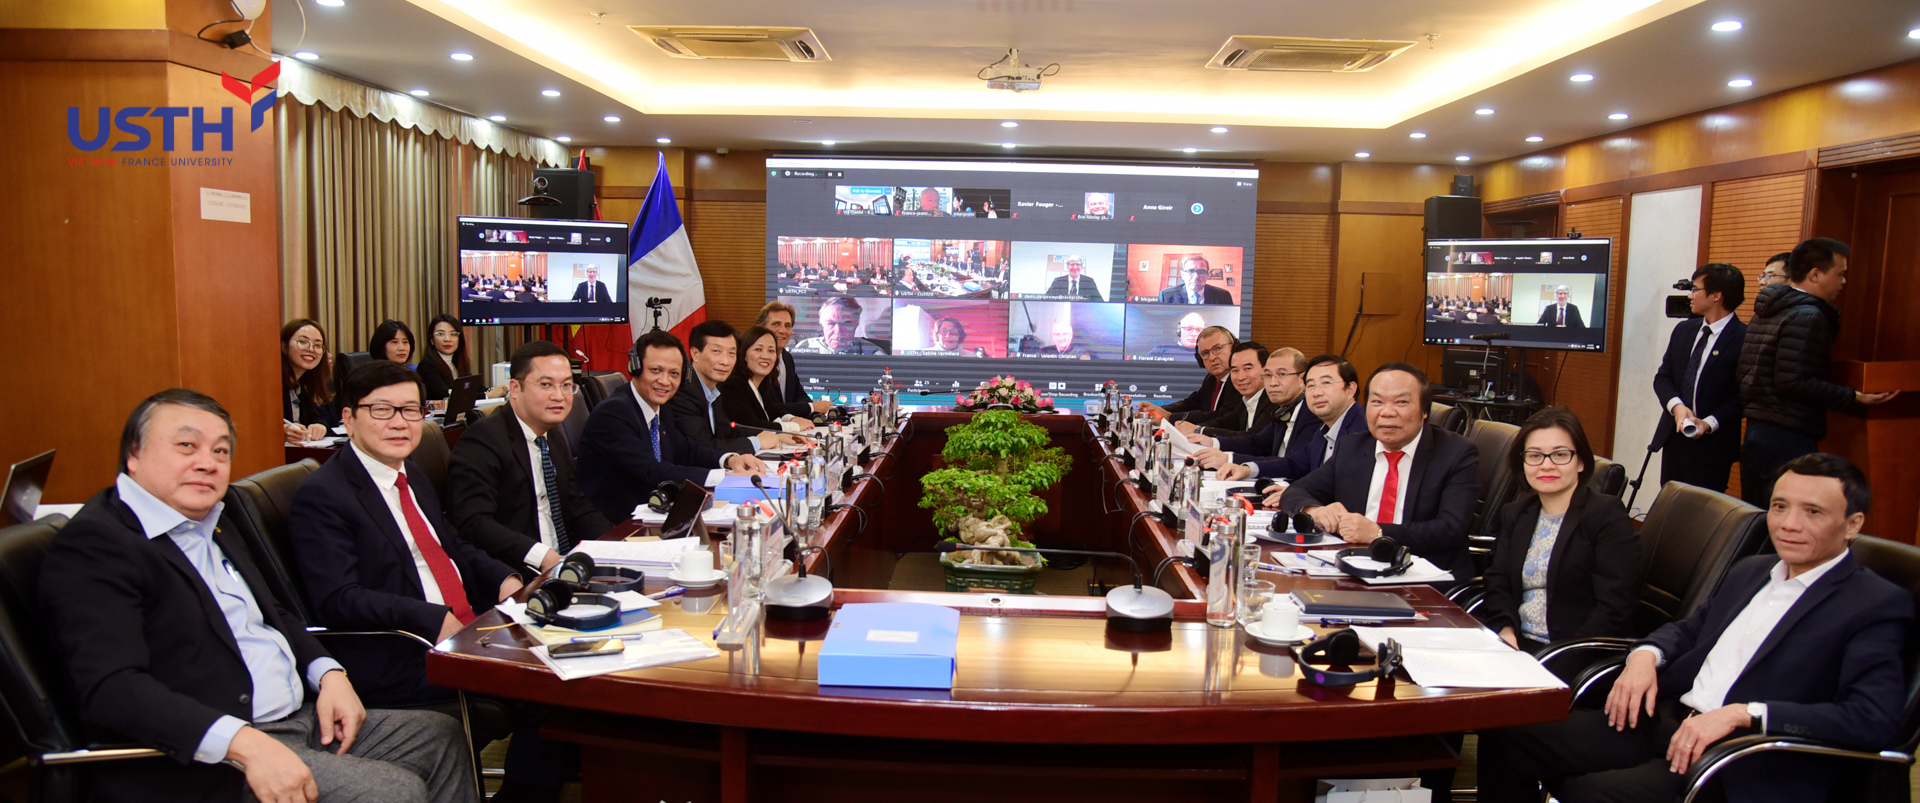 usth successfully held the 6th university council meeting 21